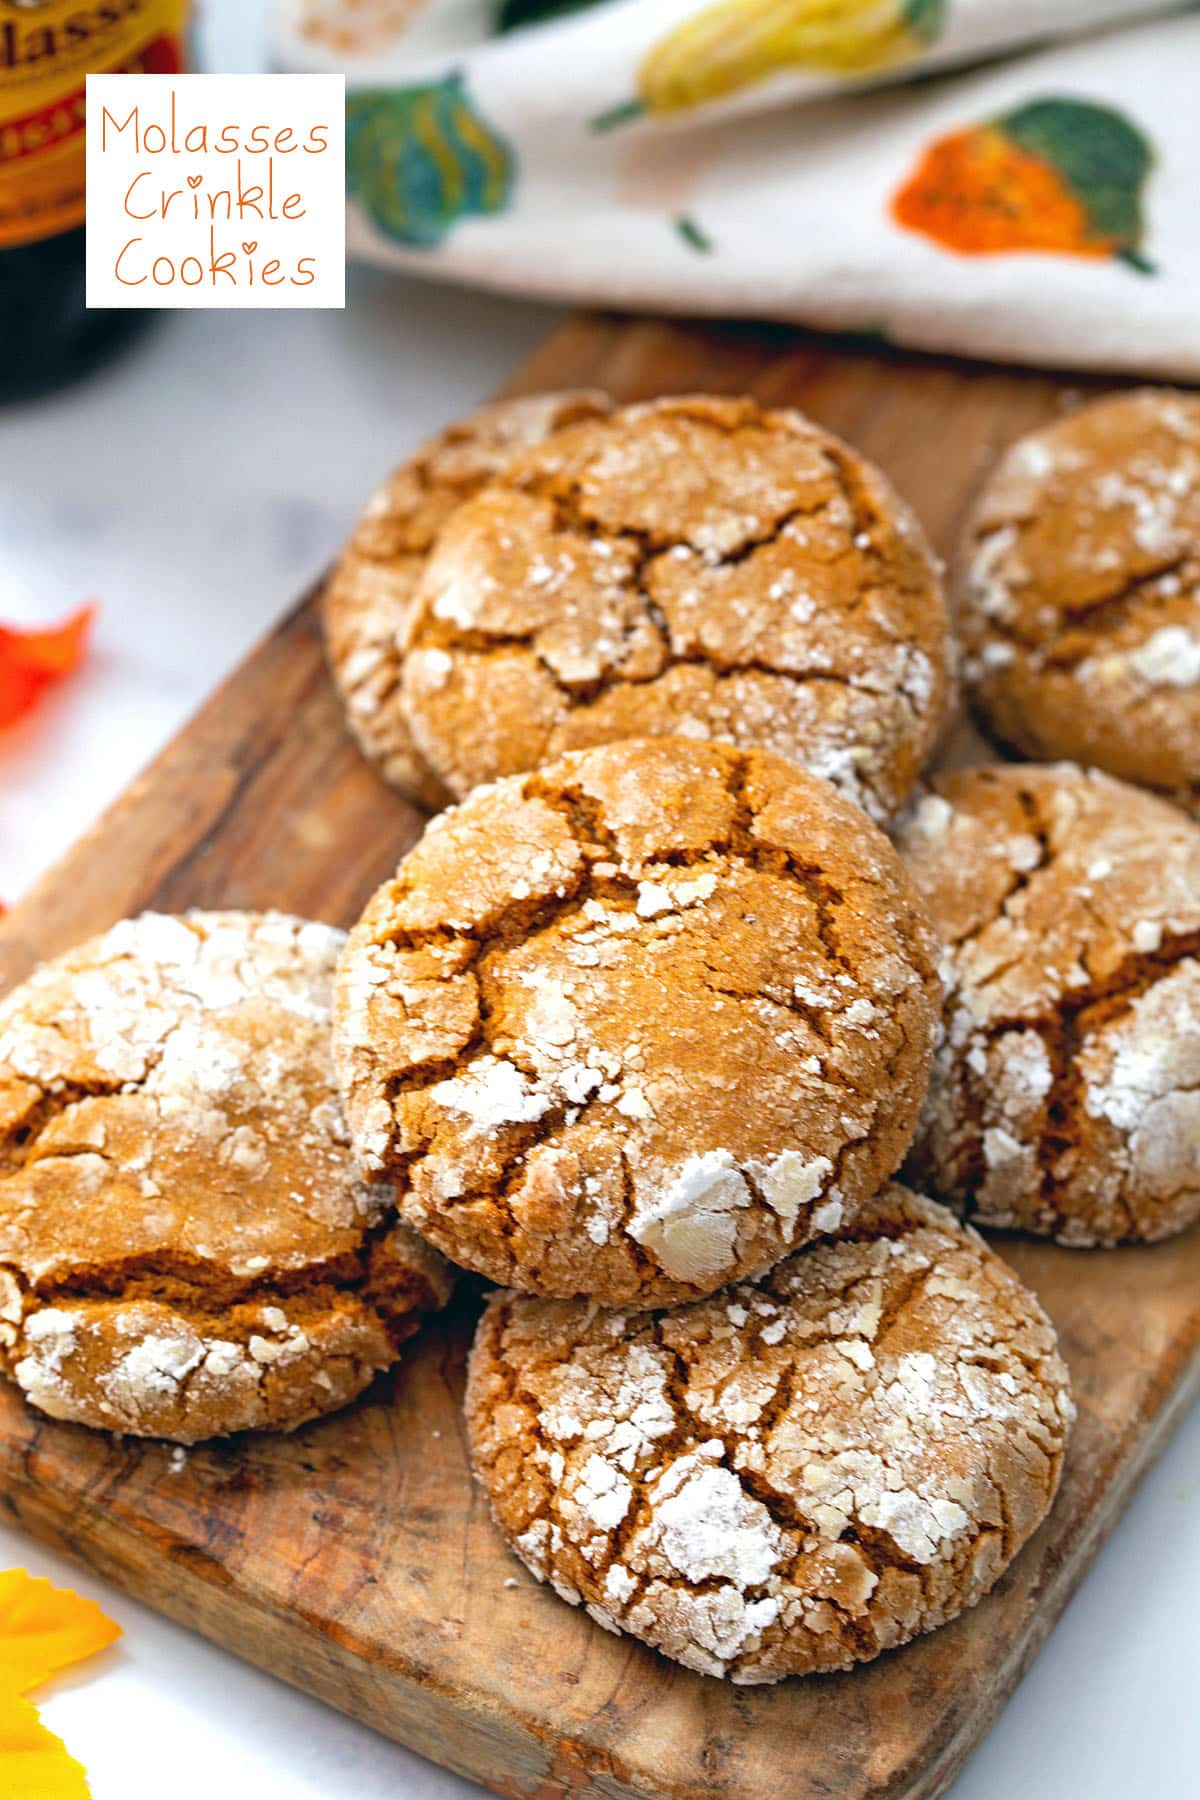 Molasses crinkle cookies on a wooden board with recipe title at top.